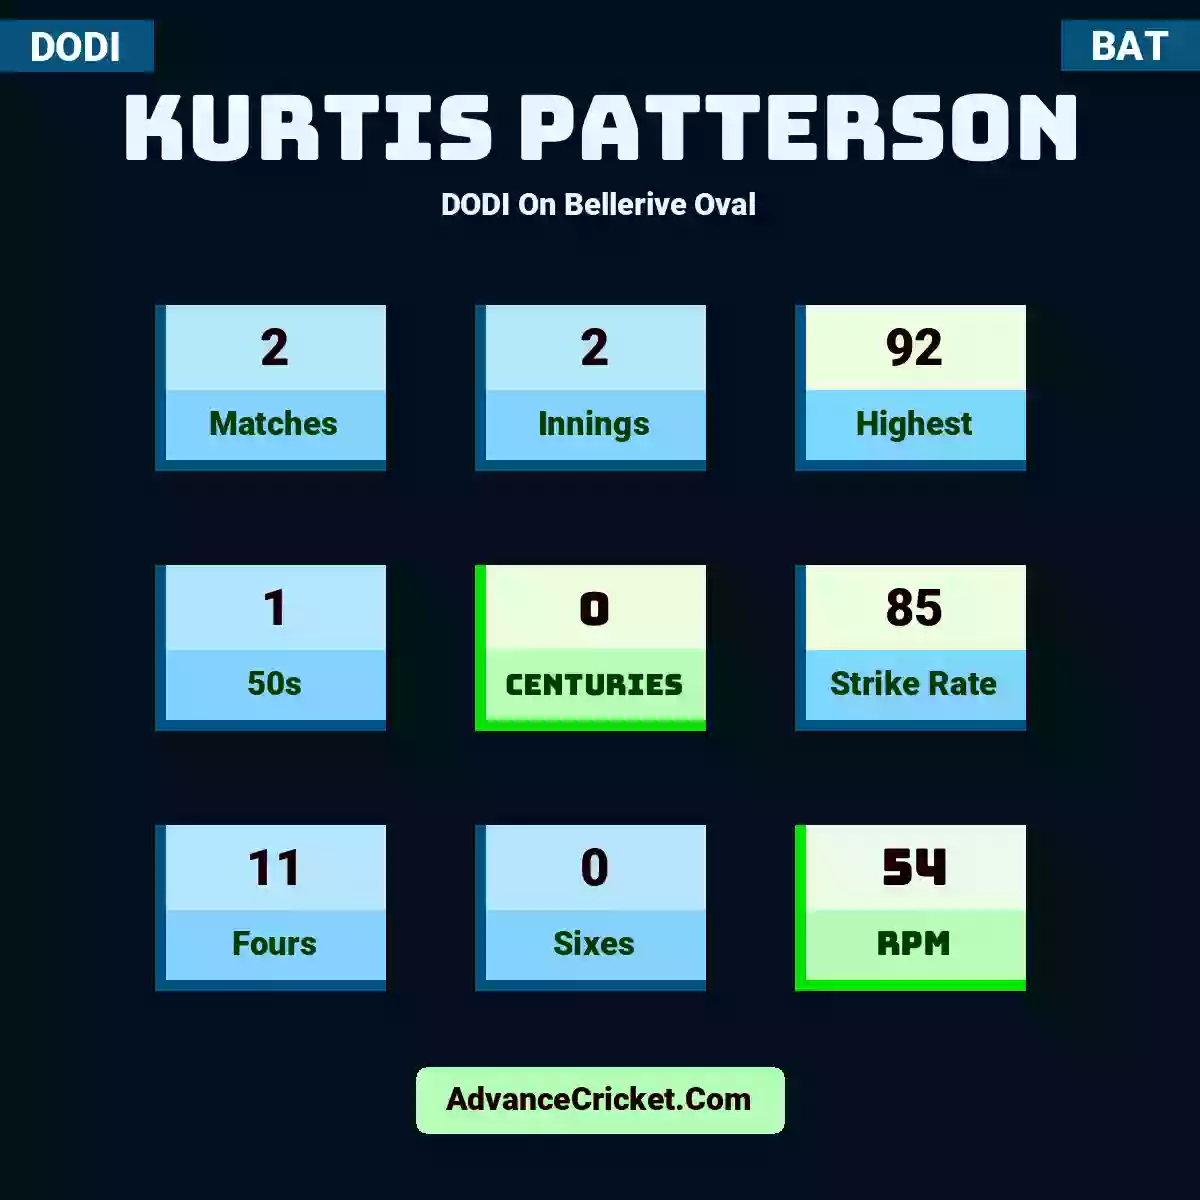 Kurtis Patterson DODI  On Bellerive Oval, Kurtis Patterson played 2 matches, scored 92 runs as highest, 1 half-centuries, and 0 centuries, with a strike rate of 85. K.Patterson hit 11 fours and 0 sixes, with an RPM of 54.